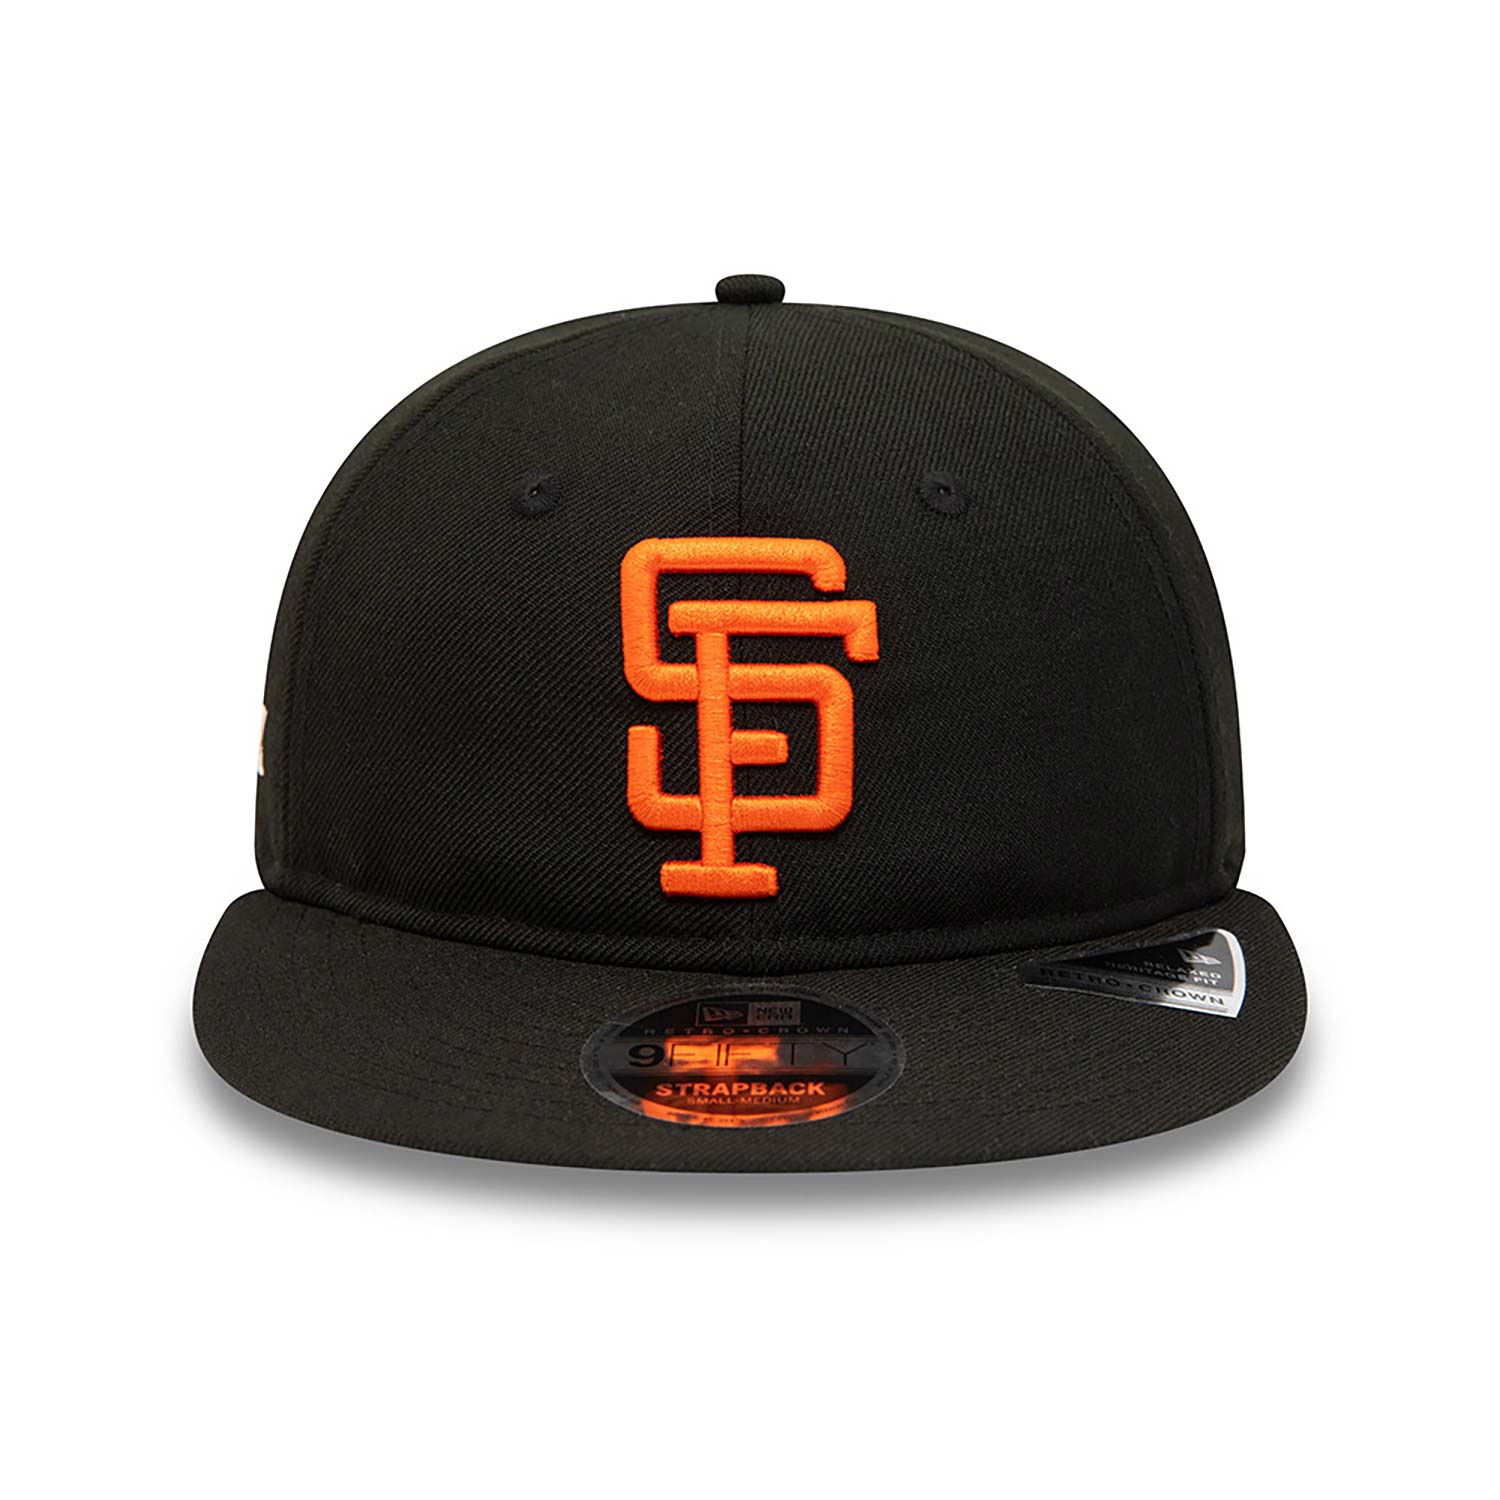 San Francisco Giants Cooperstown Multi Patch Black 9FIFTY Snapback Cap